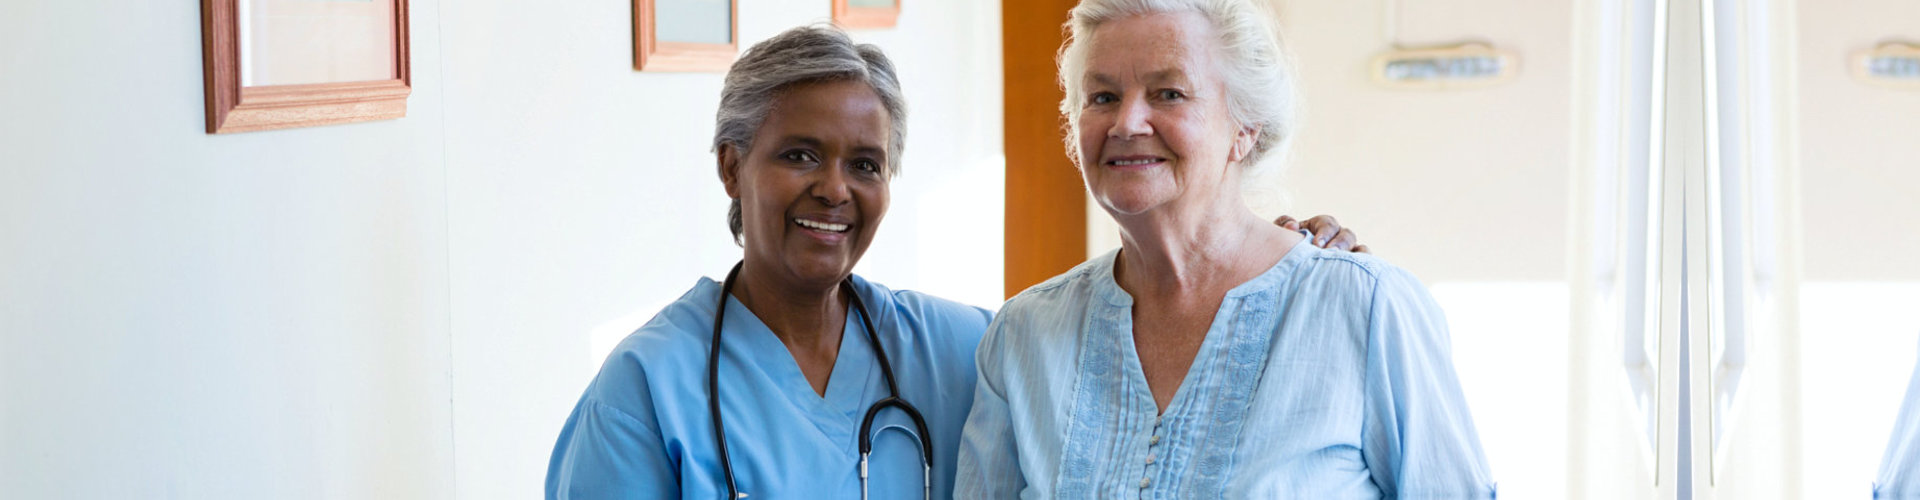 senior woman and nurse smiling each other